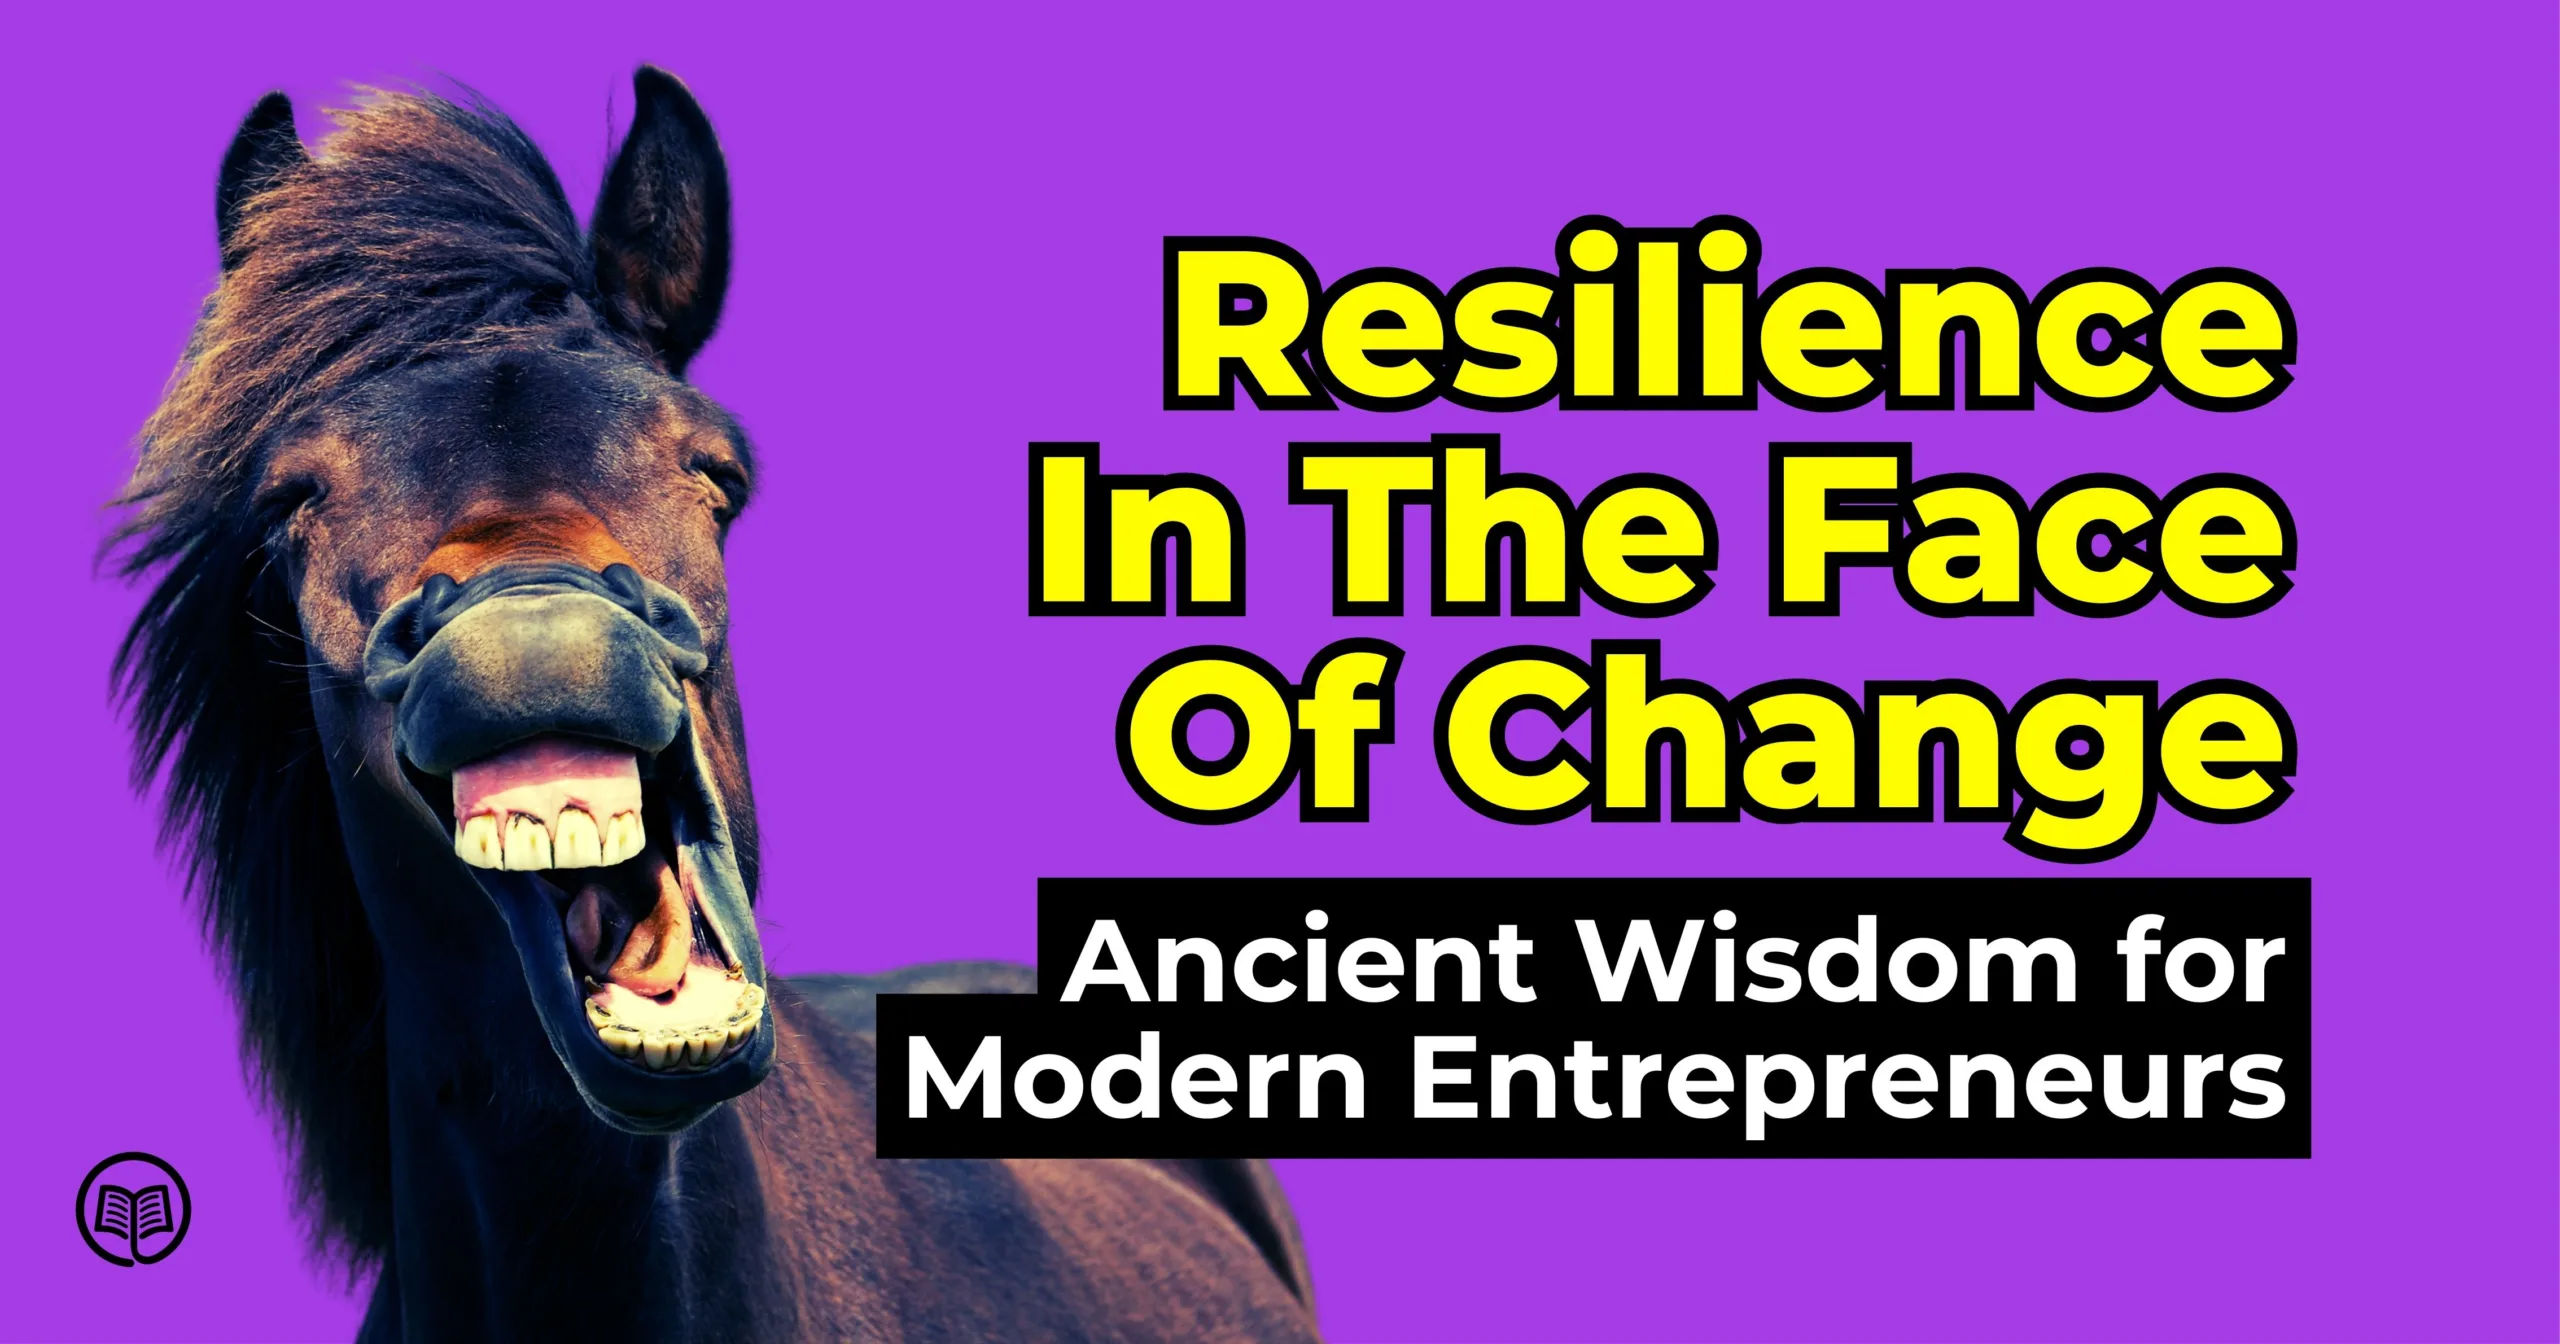 Resilience in the Face of Change: Ancient Wisdom for Modern Entrepreneurs